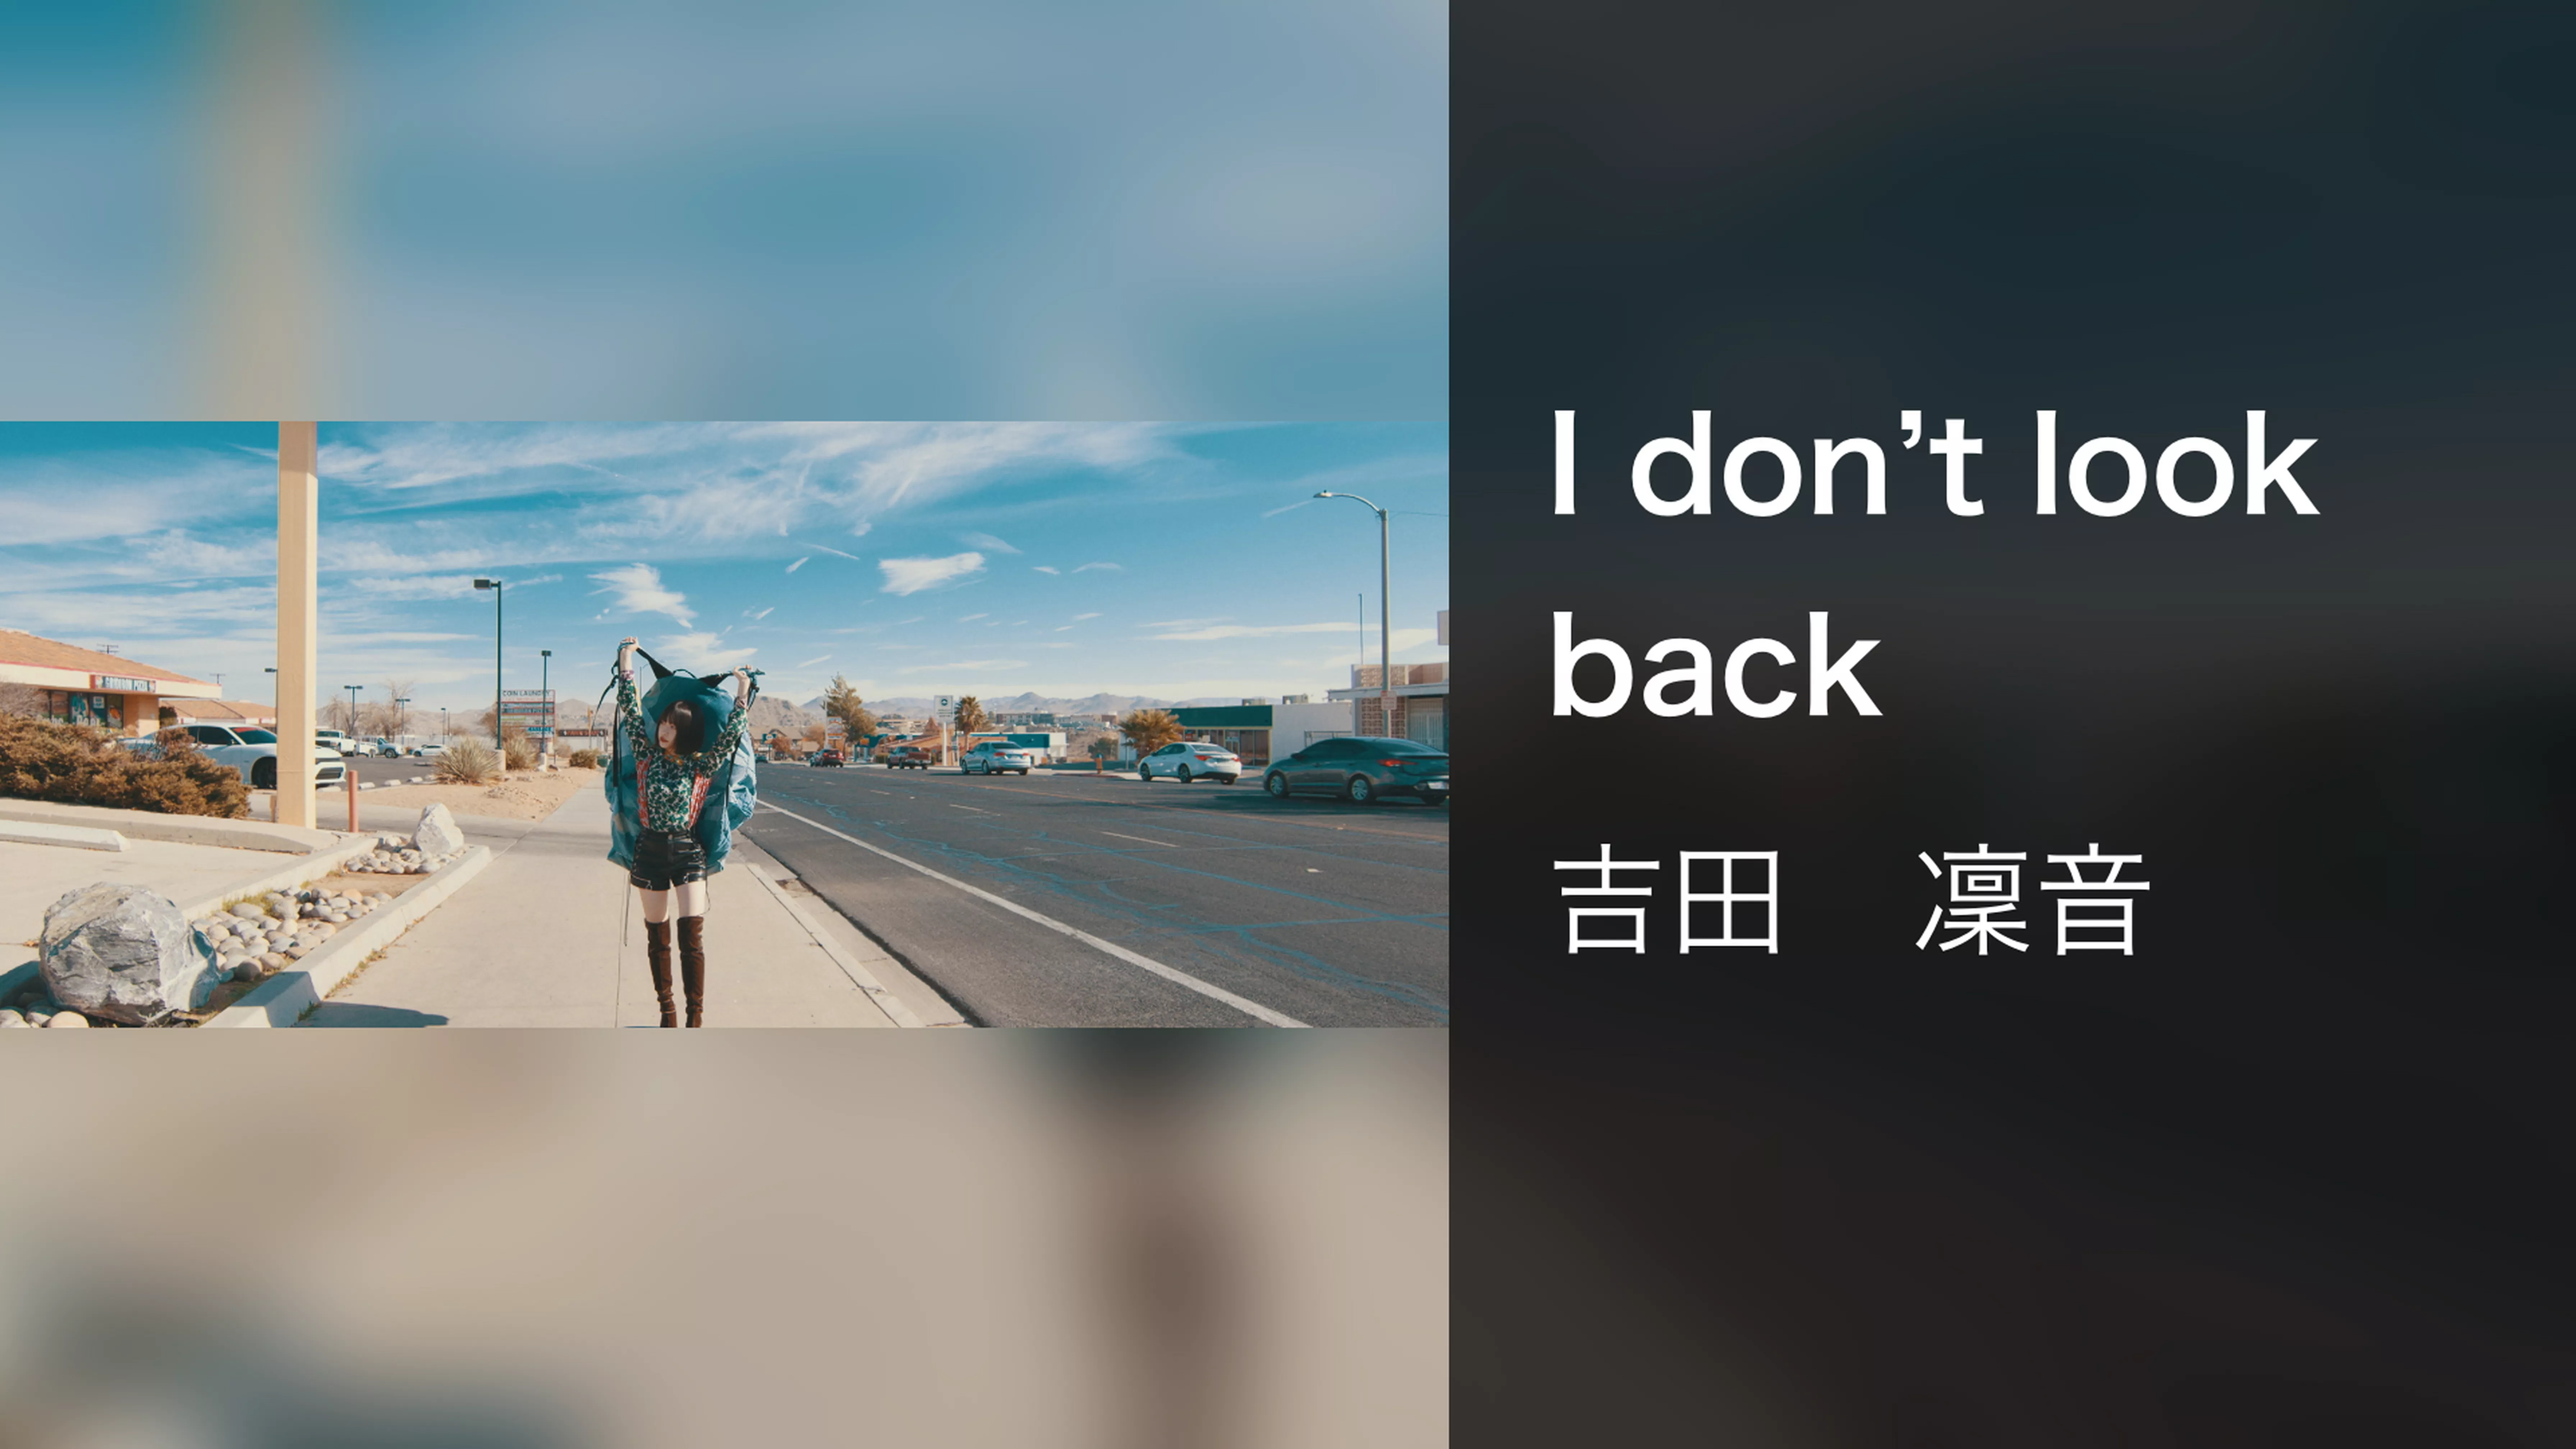 I don't look back